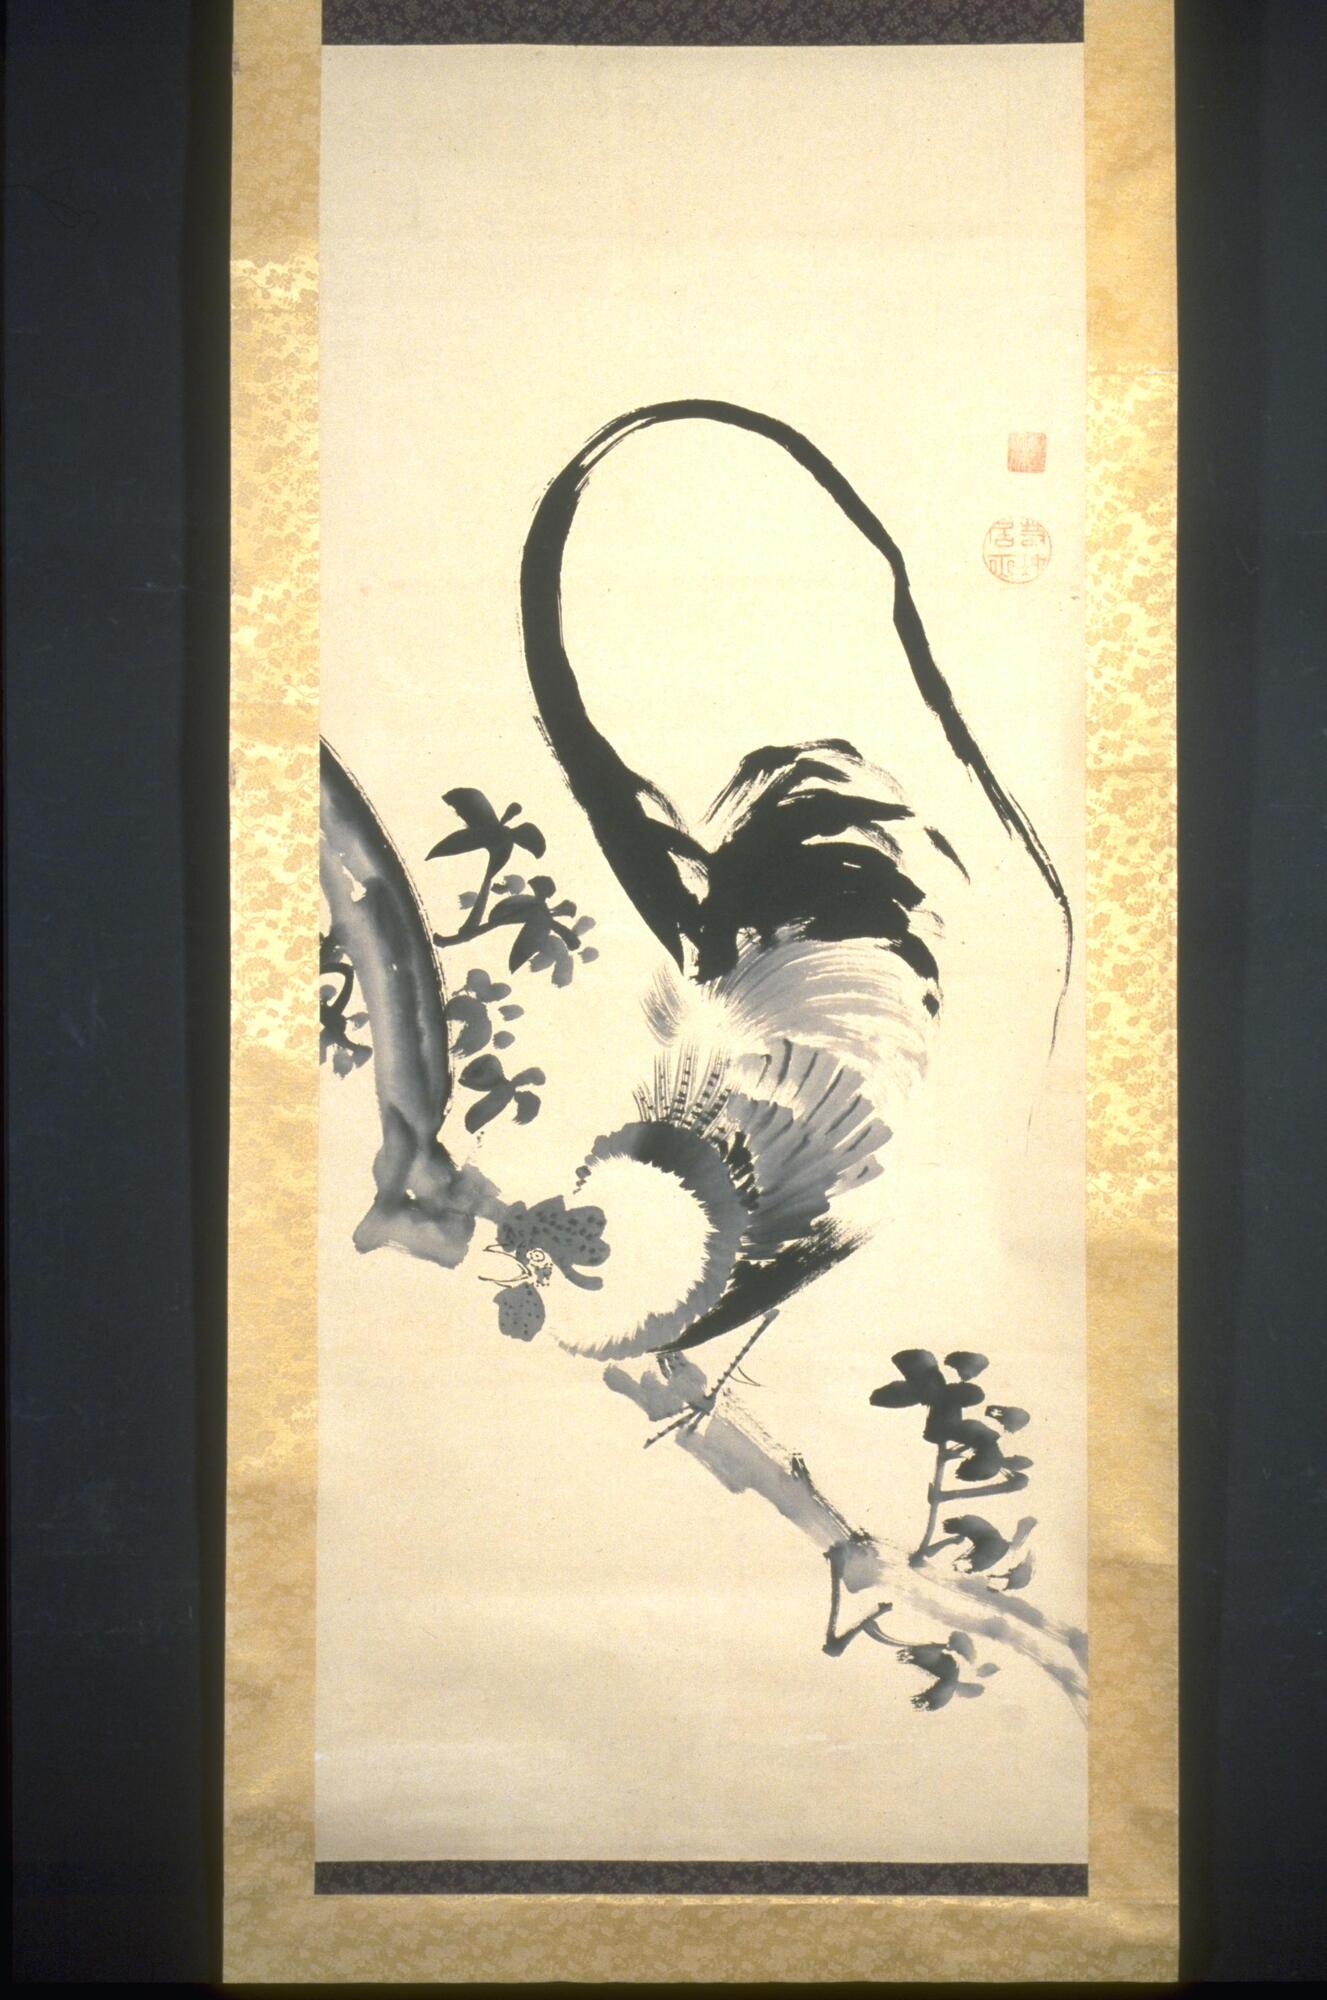 This hanging scroll depicts a chicken executed in rapid brushstrokes, using various shades of black ink. The face of the bird is naturalistically depicted, while its tail feathers are somewhat abstracted. 